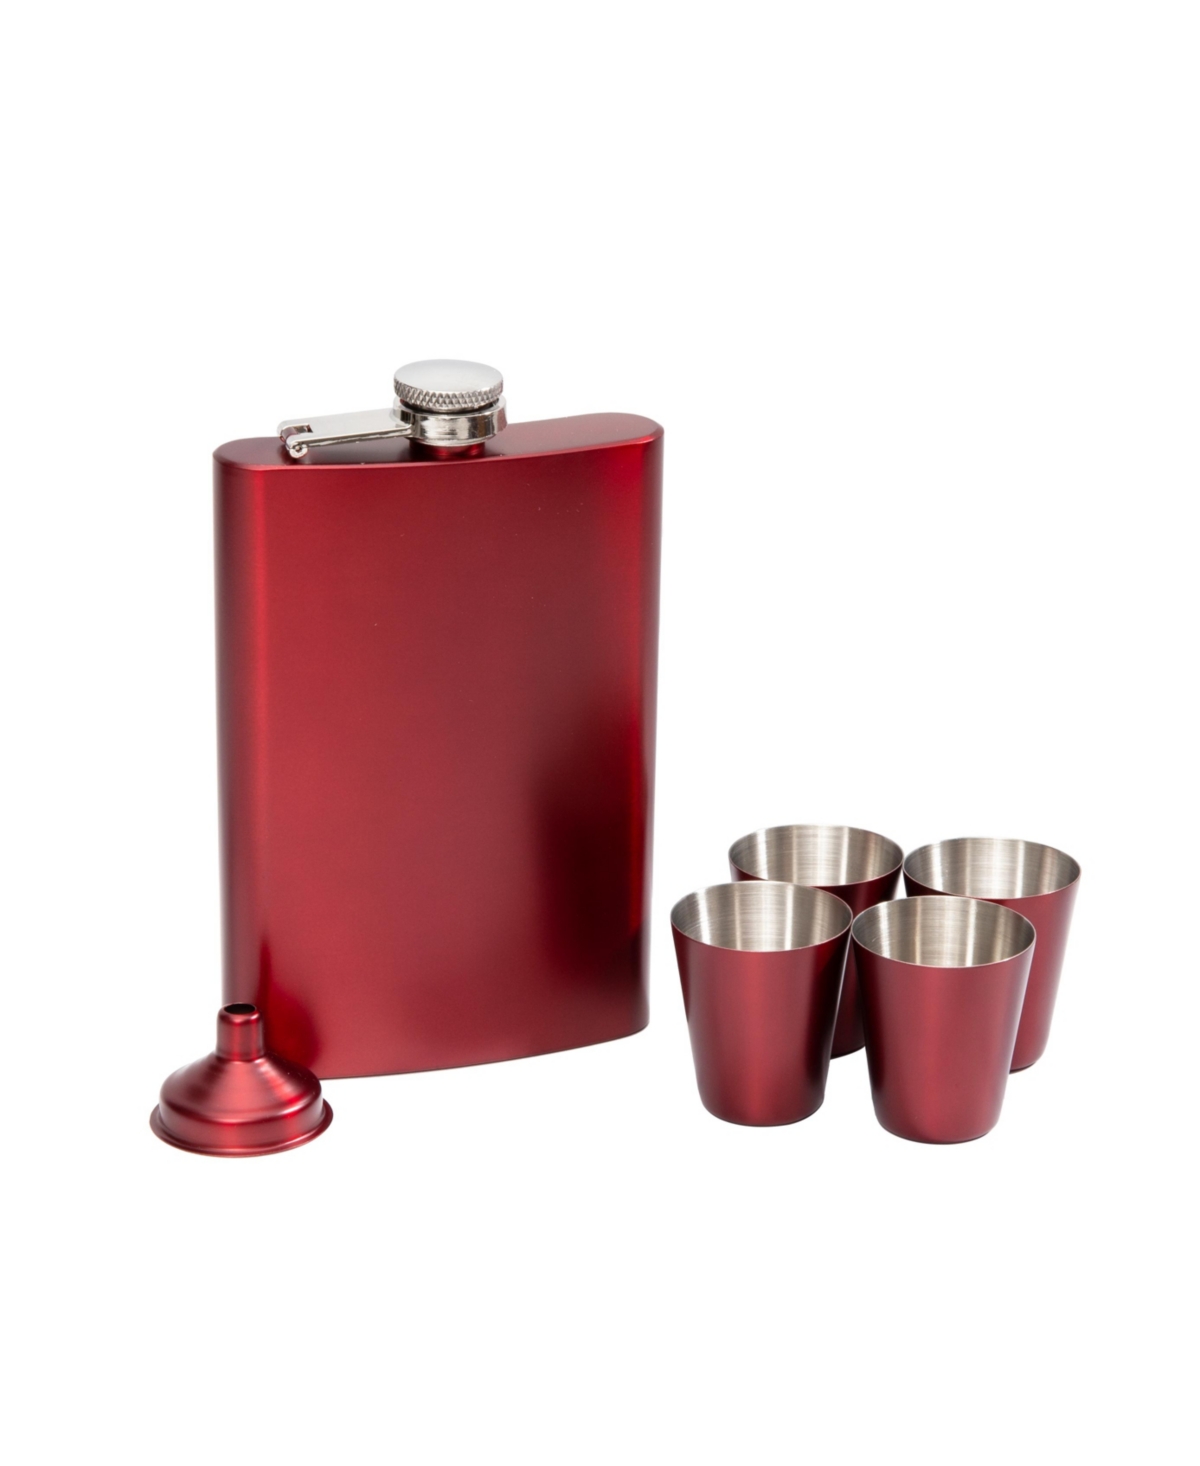 Cambridge Flask, 6 Piece Set In Red